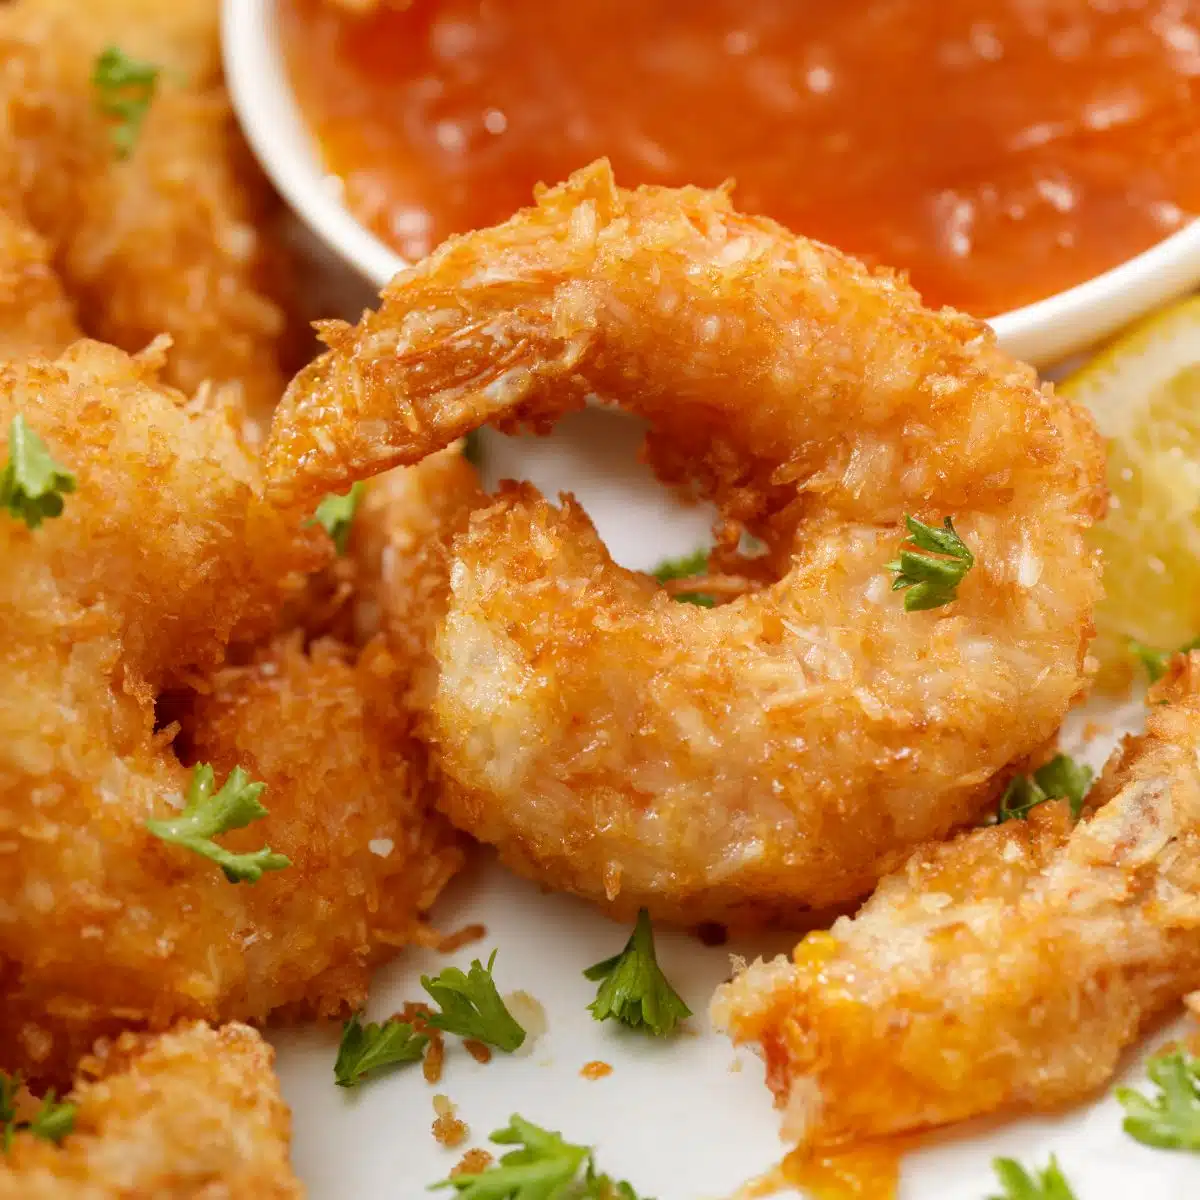 Air-fryer coconut shrimp on plate with dipping sauce.